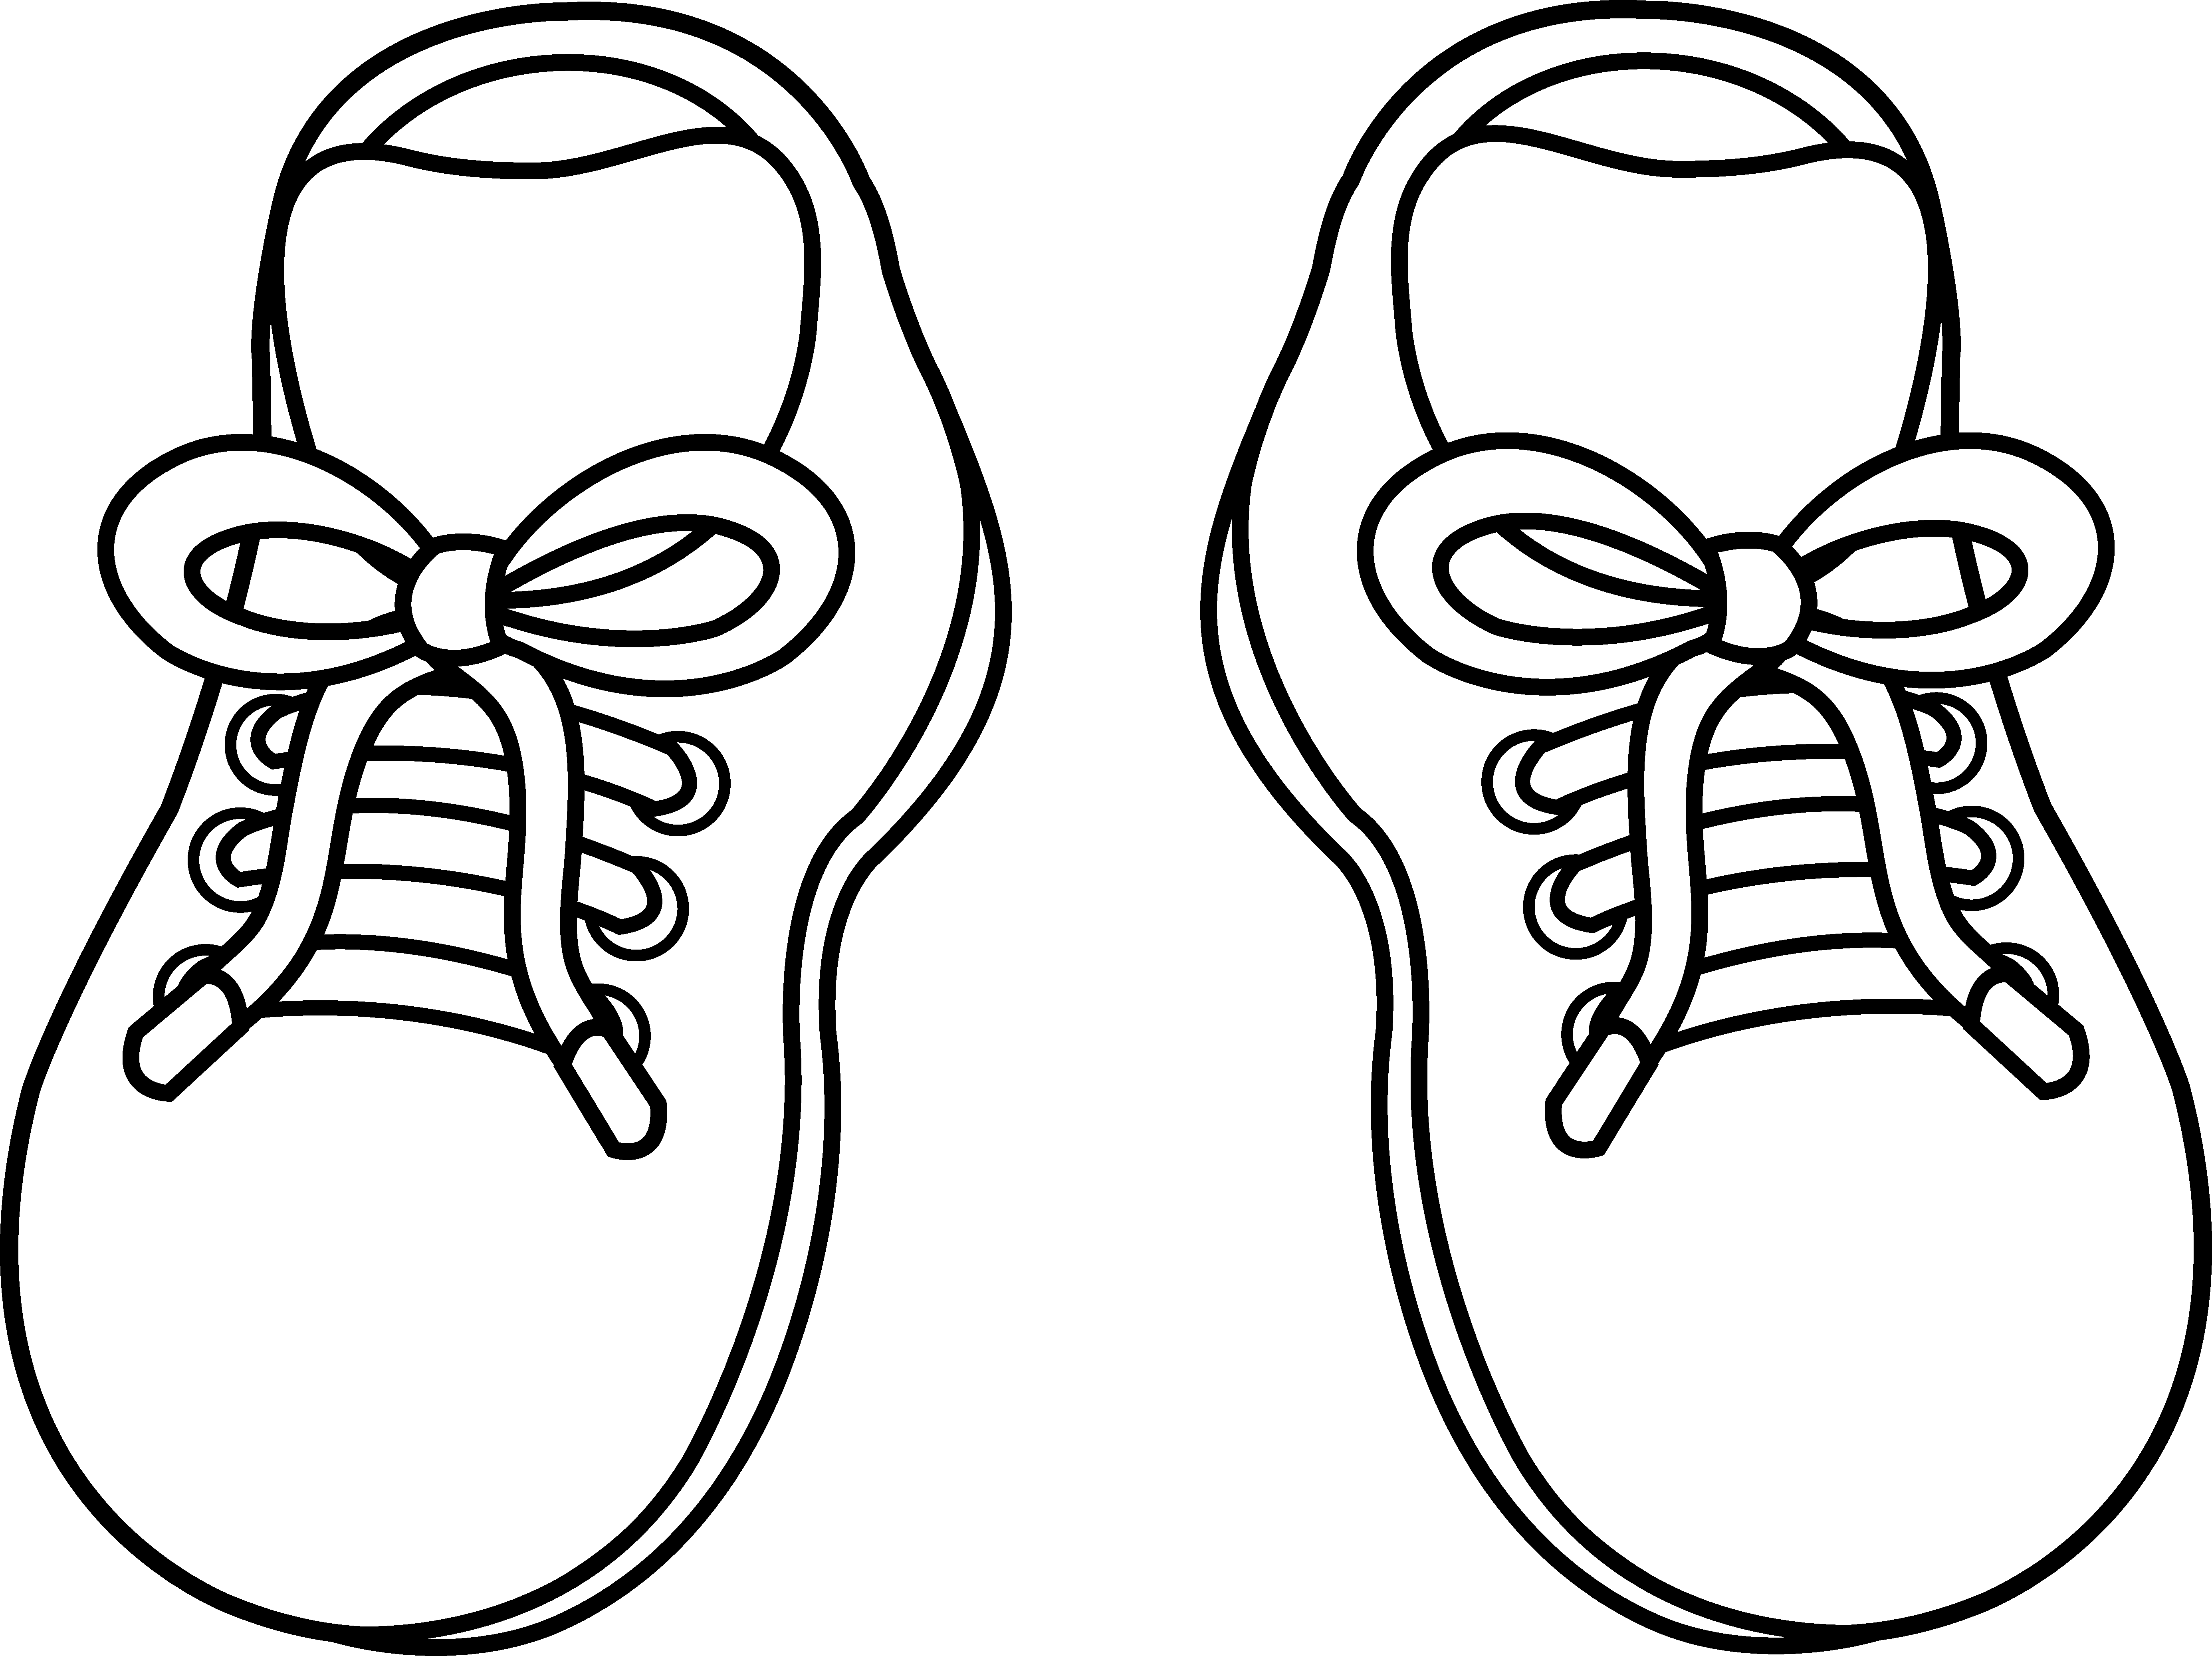 Mud clipart pete the cat i love my white shoe.  collection of outline